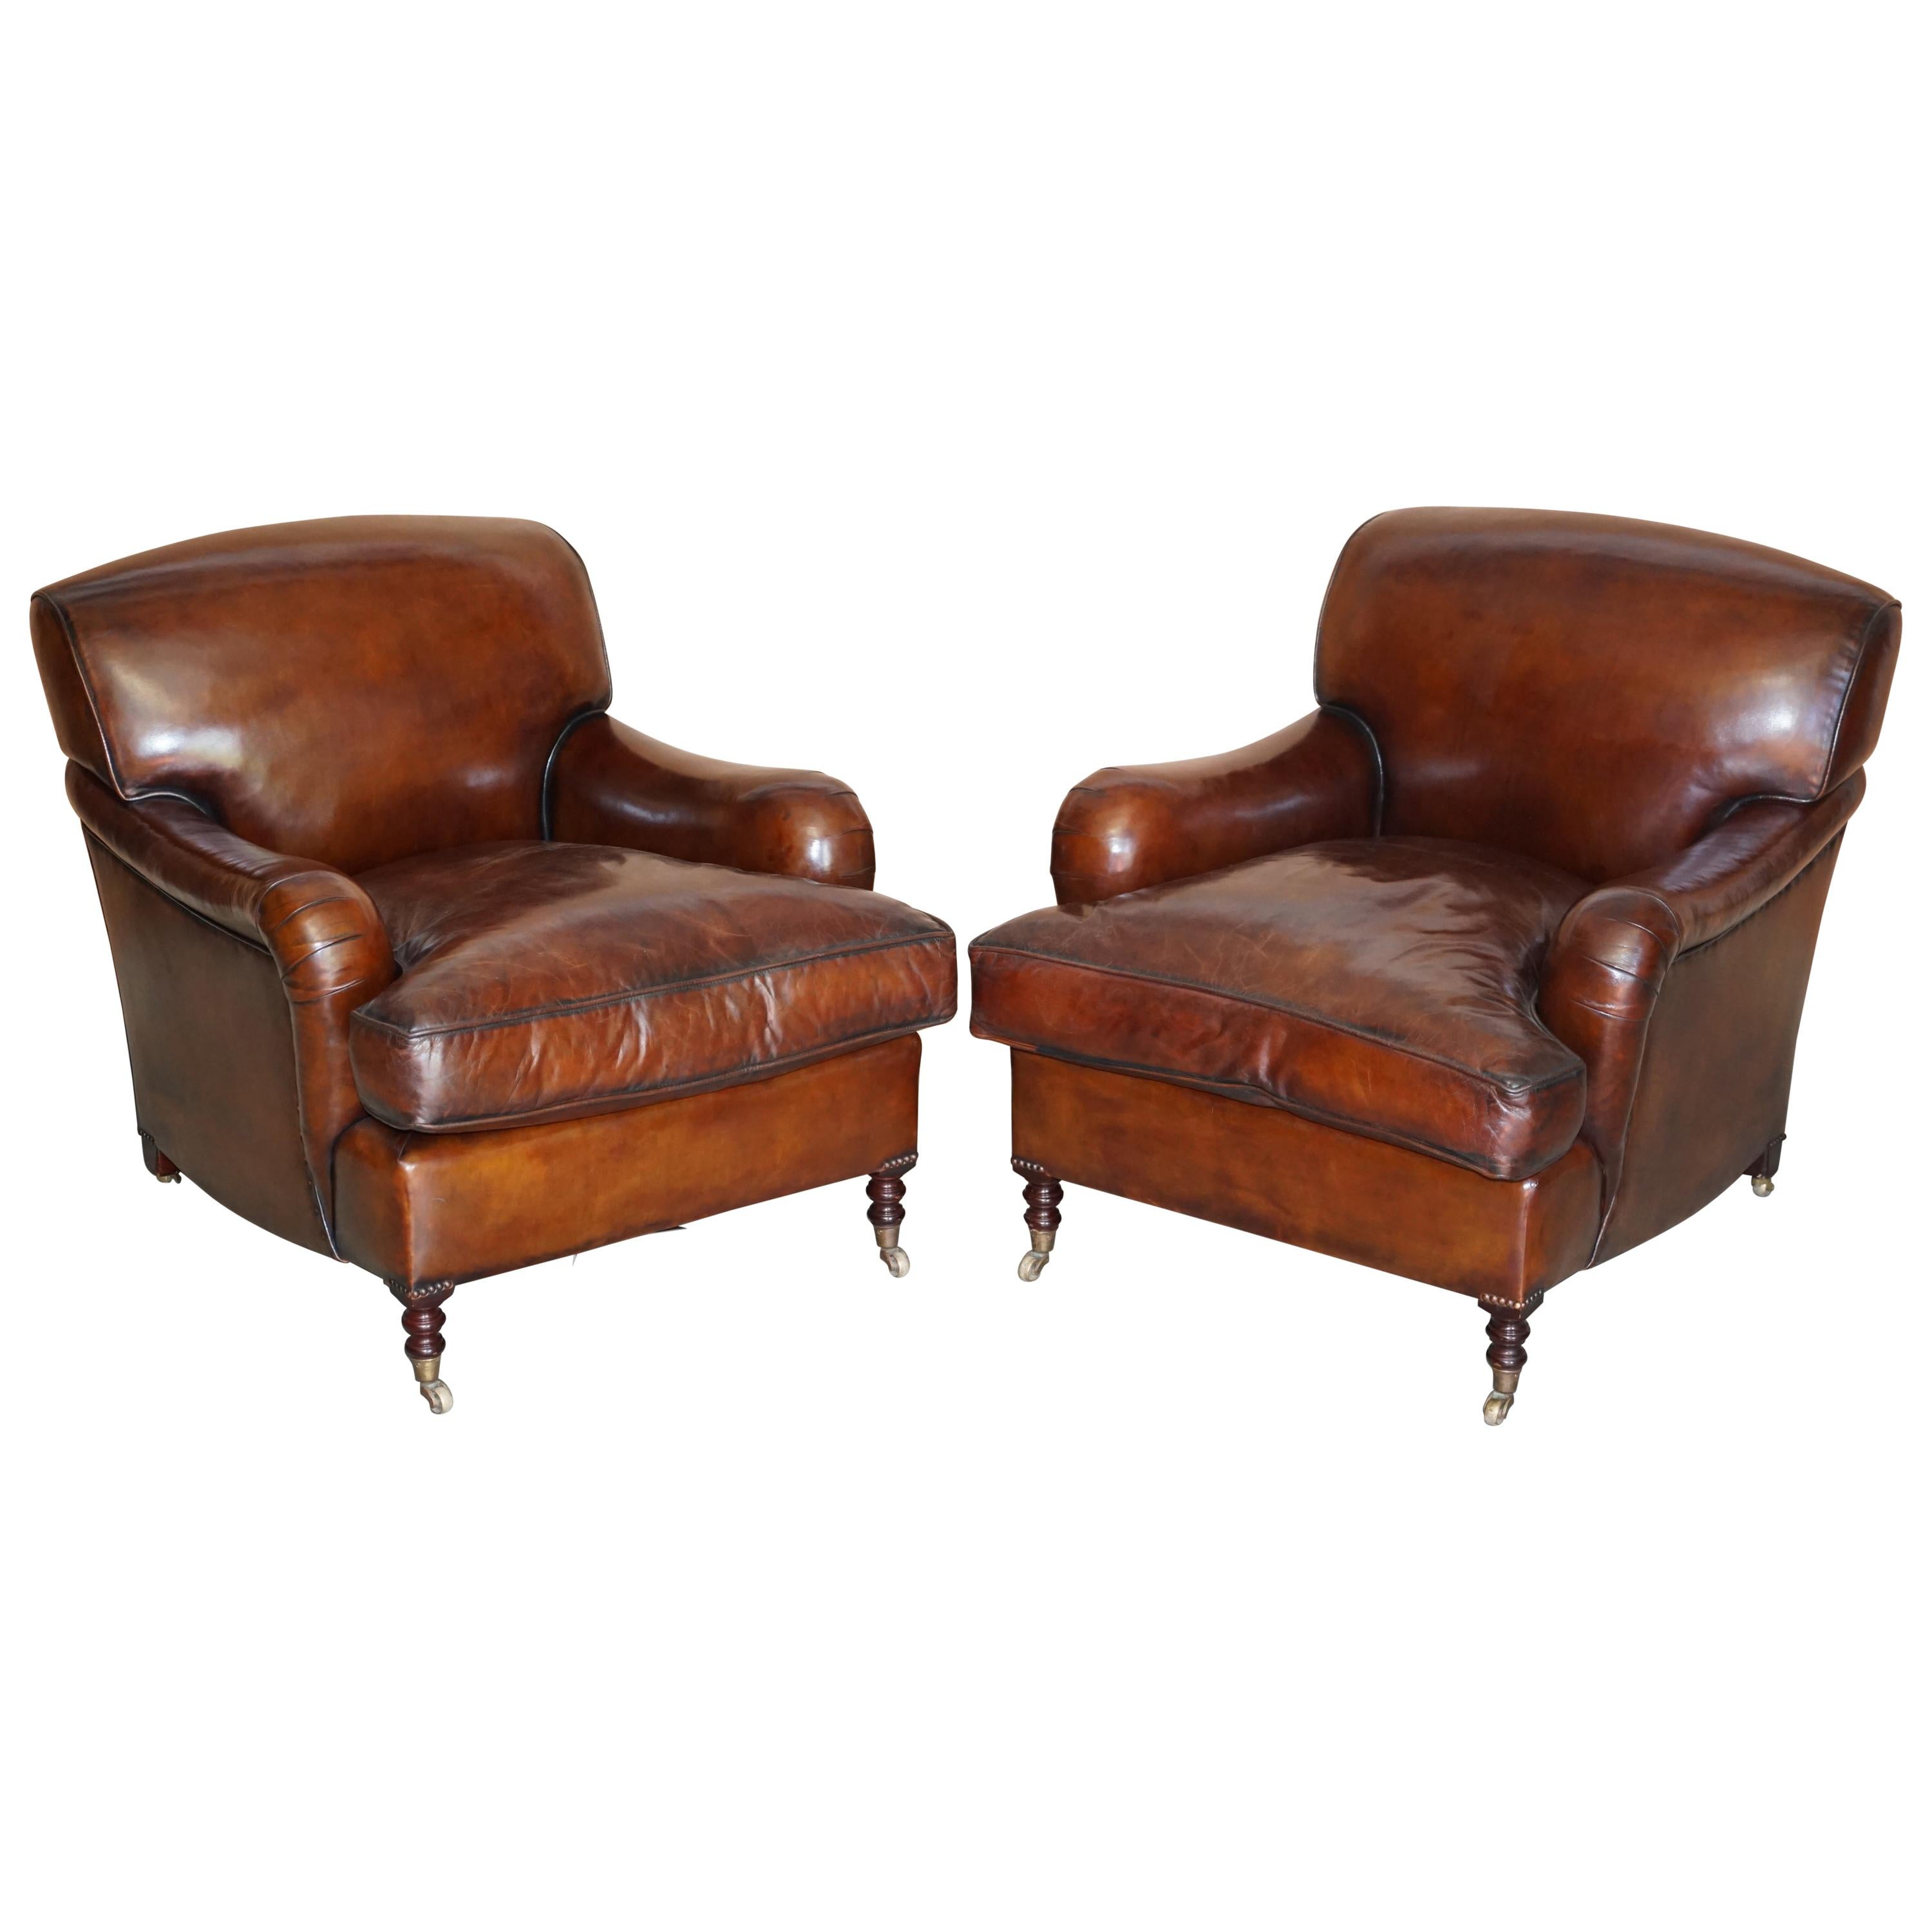 Pair of George Smith Signature Scroll Arm Hand Dyed Brown Leather Armchairs